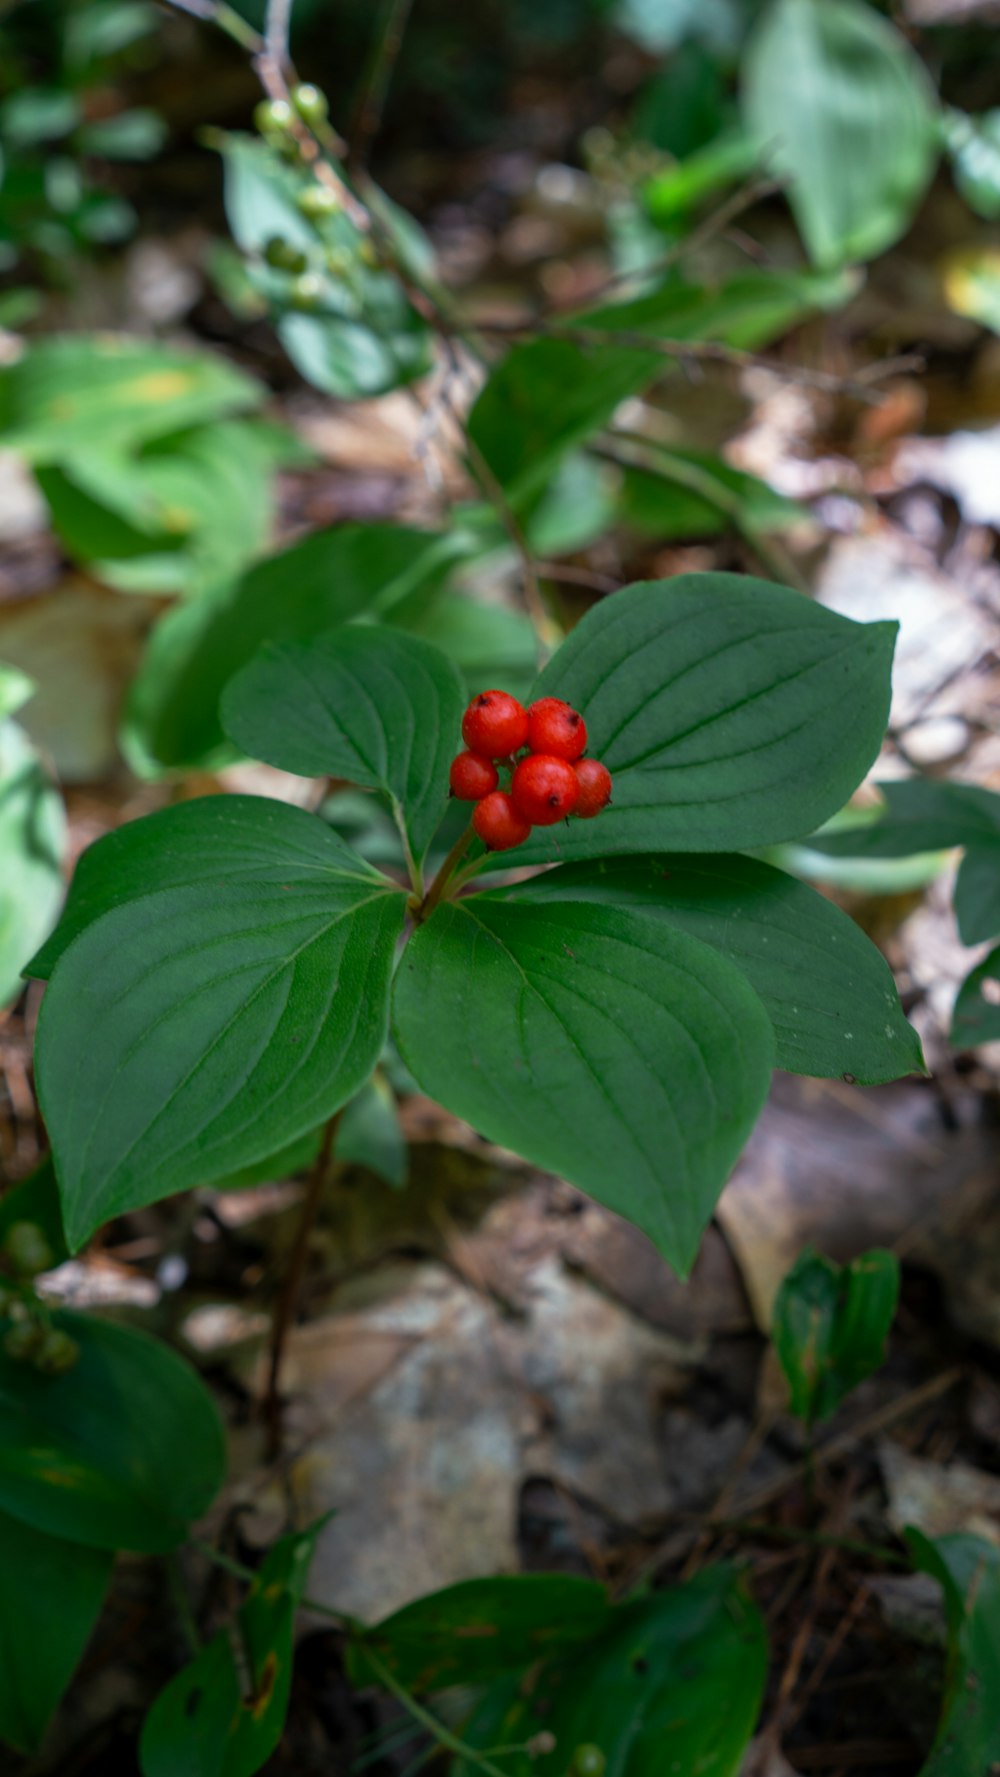 a small red berry on a green leafy plant